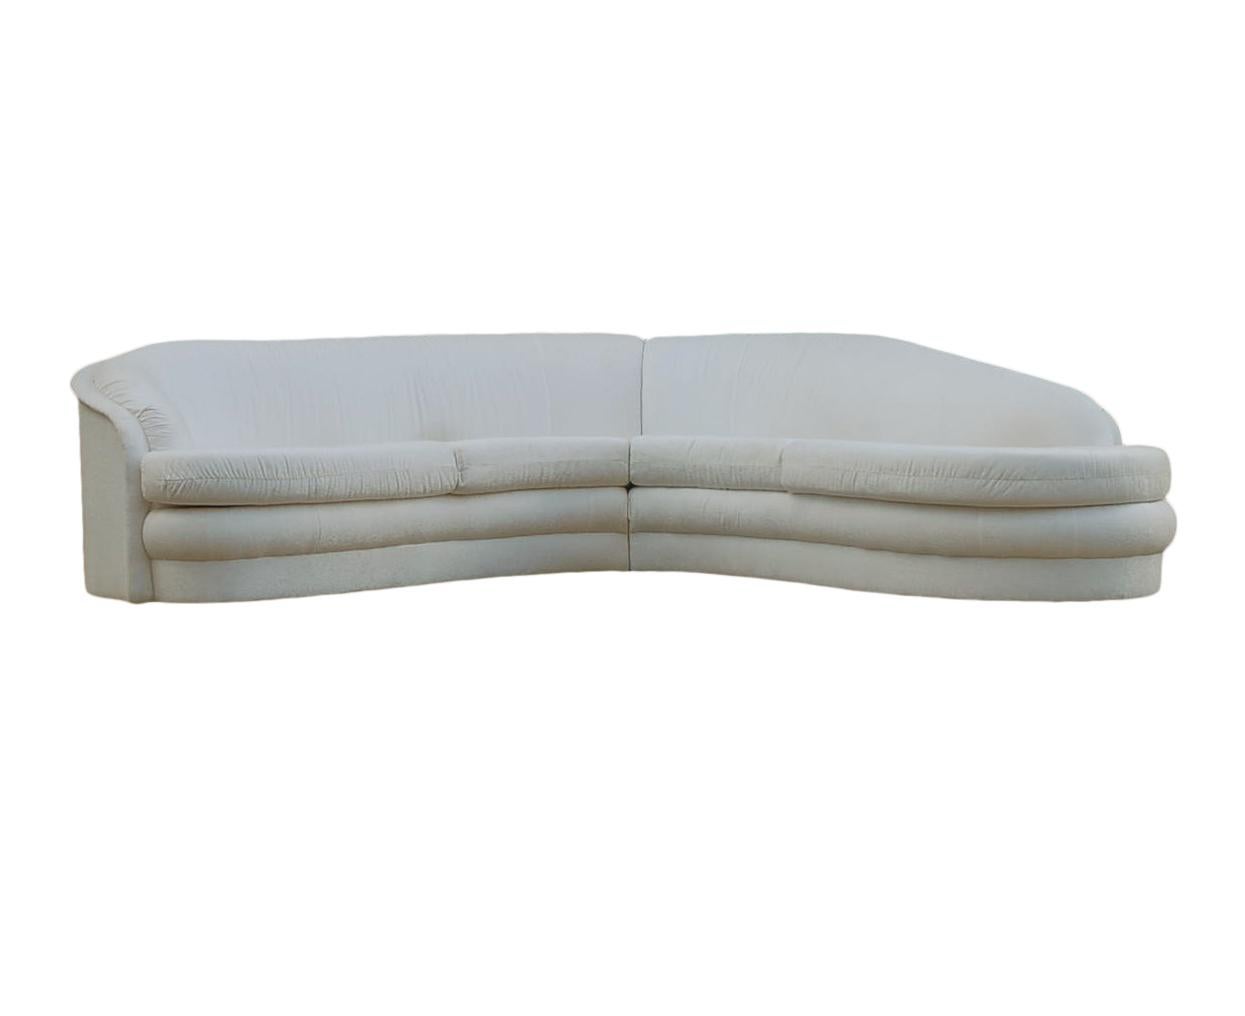 Late 20th Century Mid-Century Modern Curved Serpentine Sectional Sofa in White